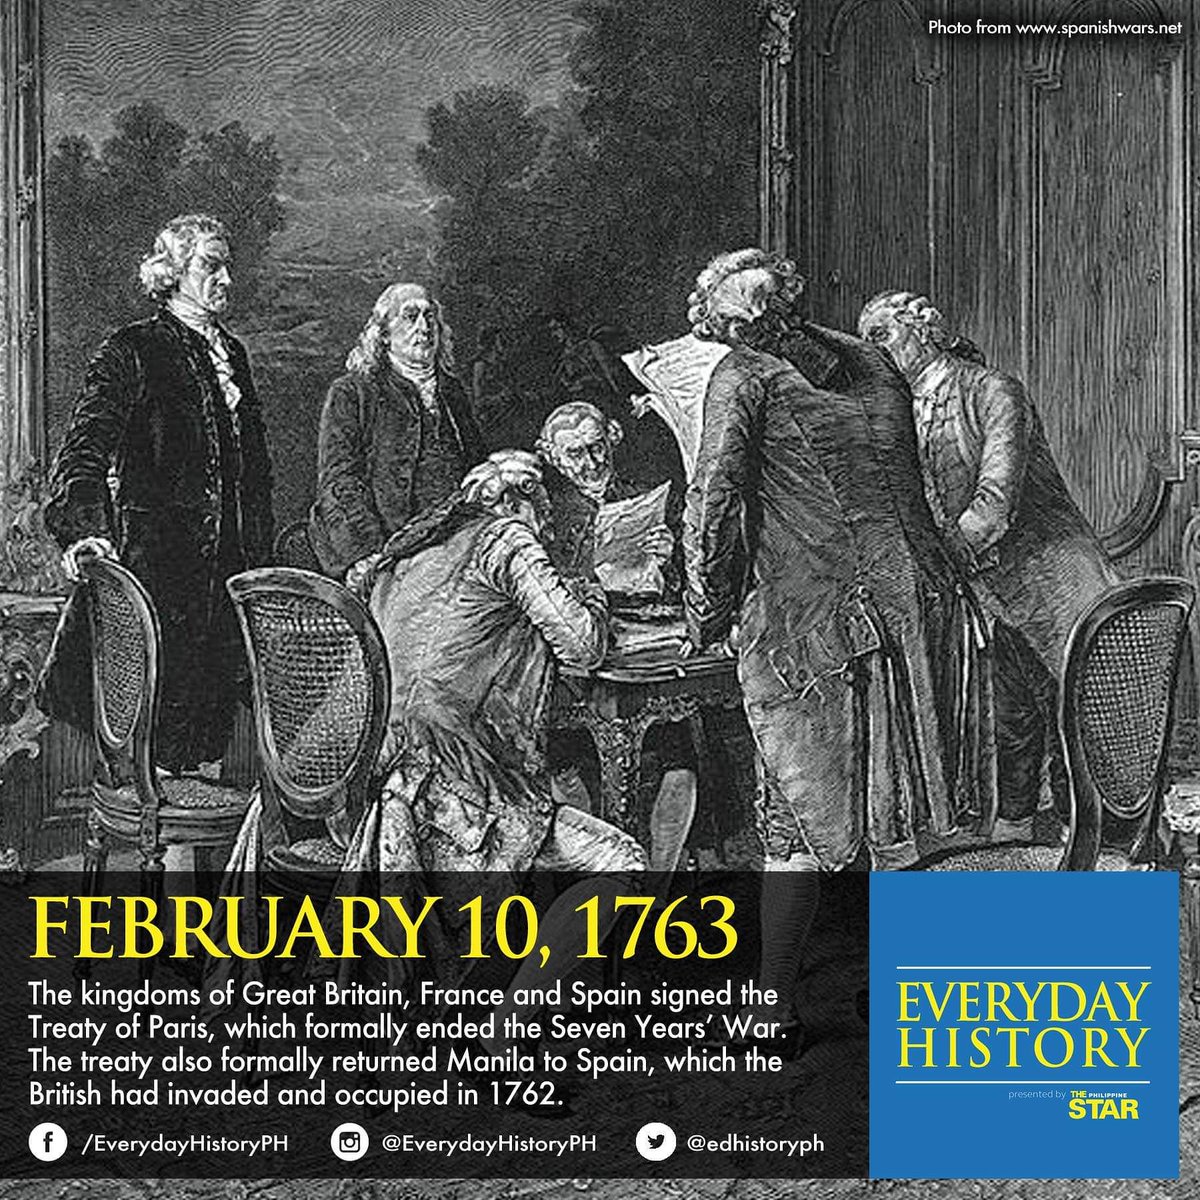 #February10 | On this day in 1763, the kingdoms of Great Britain, France and Spain signed the Treaty of Paris, which formally ended the Seven Years’ War. The treaty also formally returned Manila to Spain, which the British had invaded and occupied in 1762.